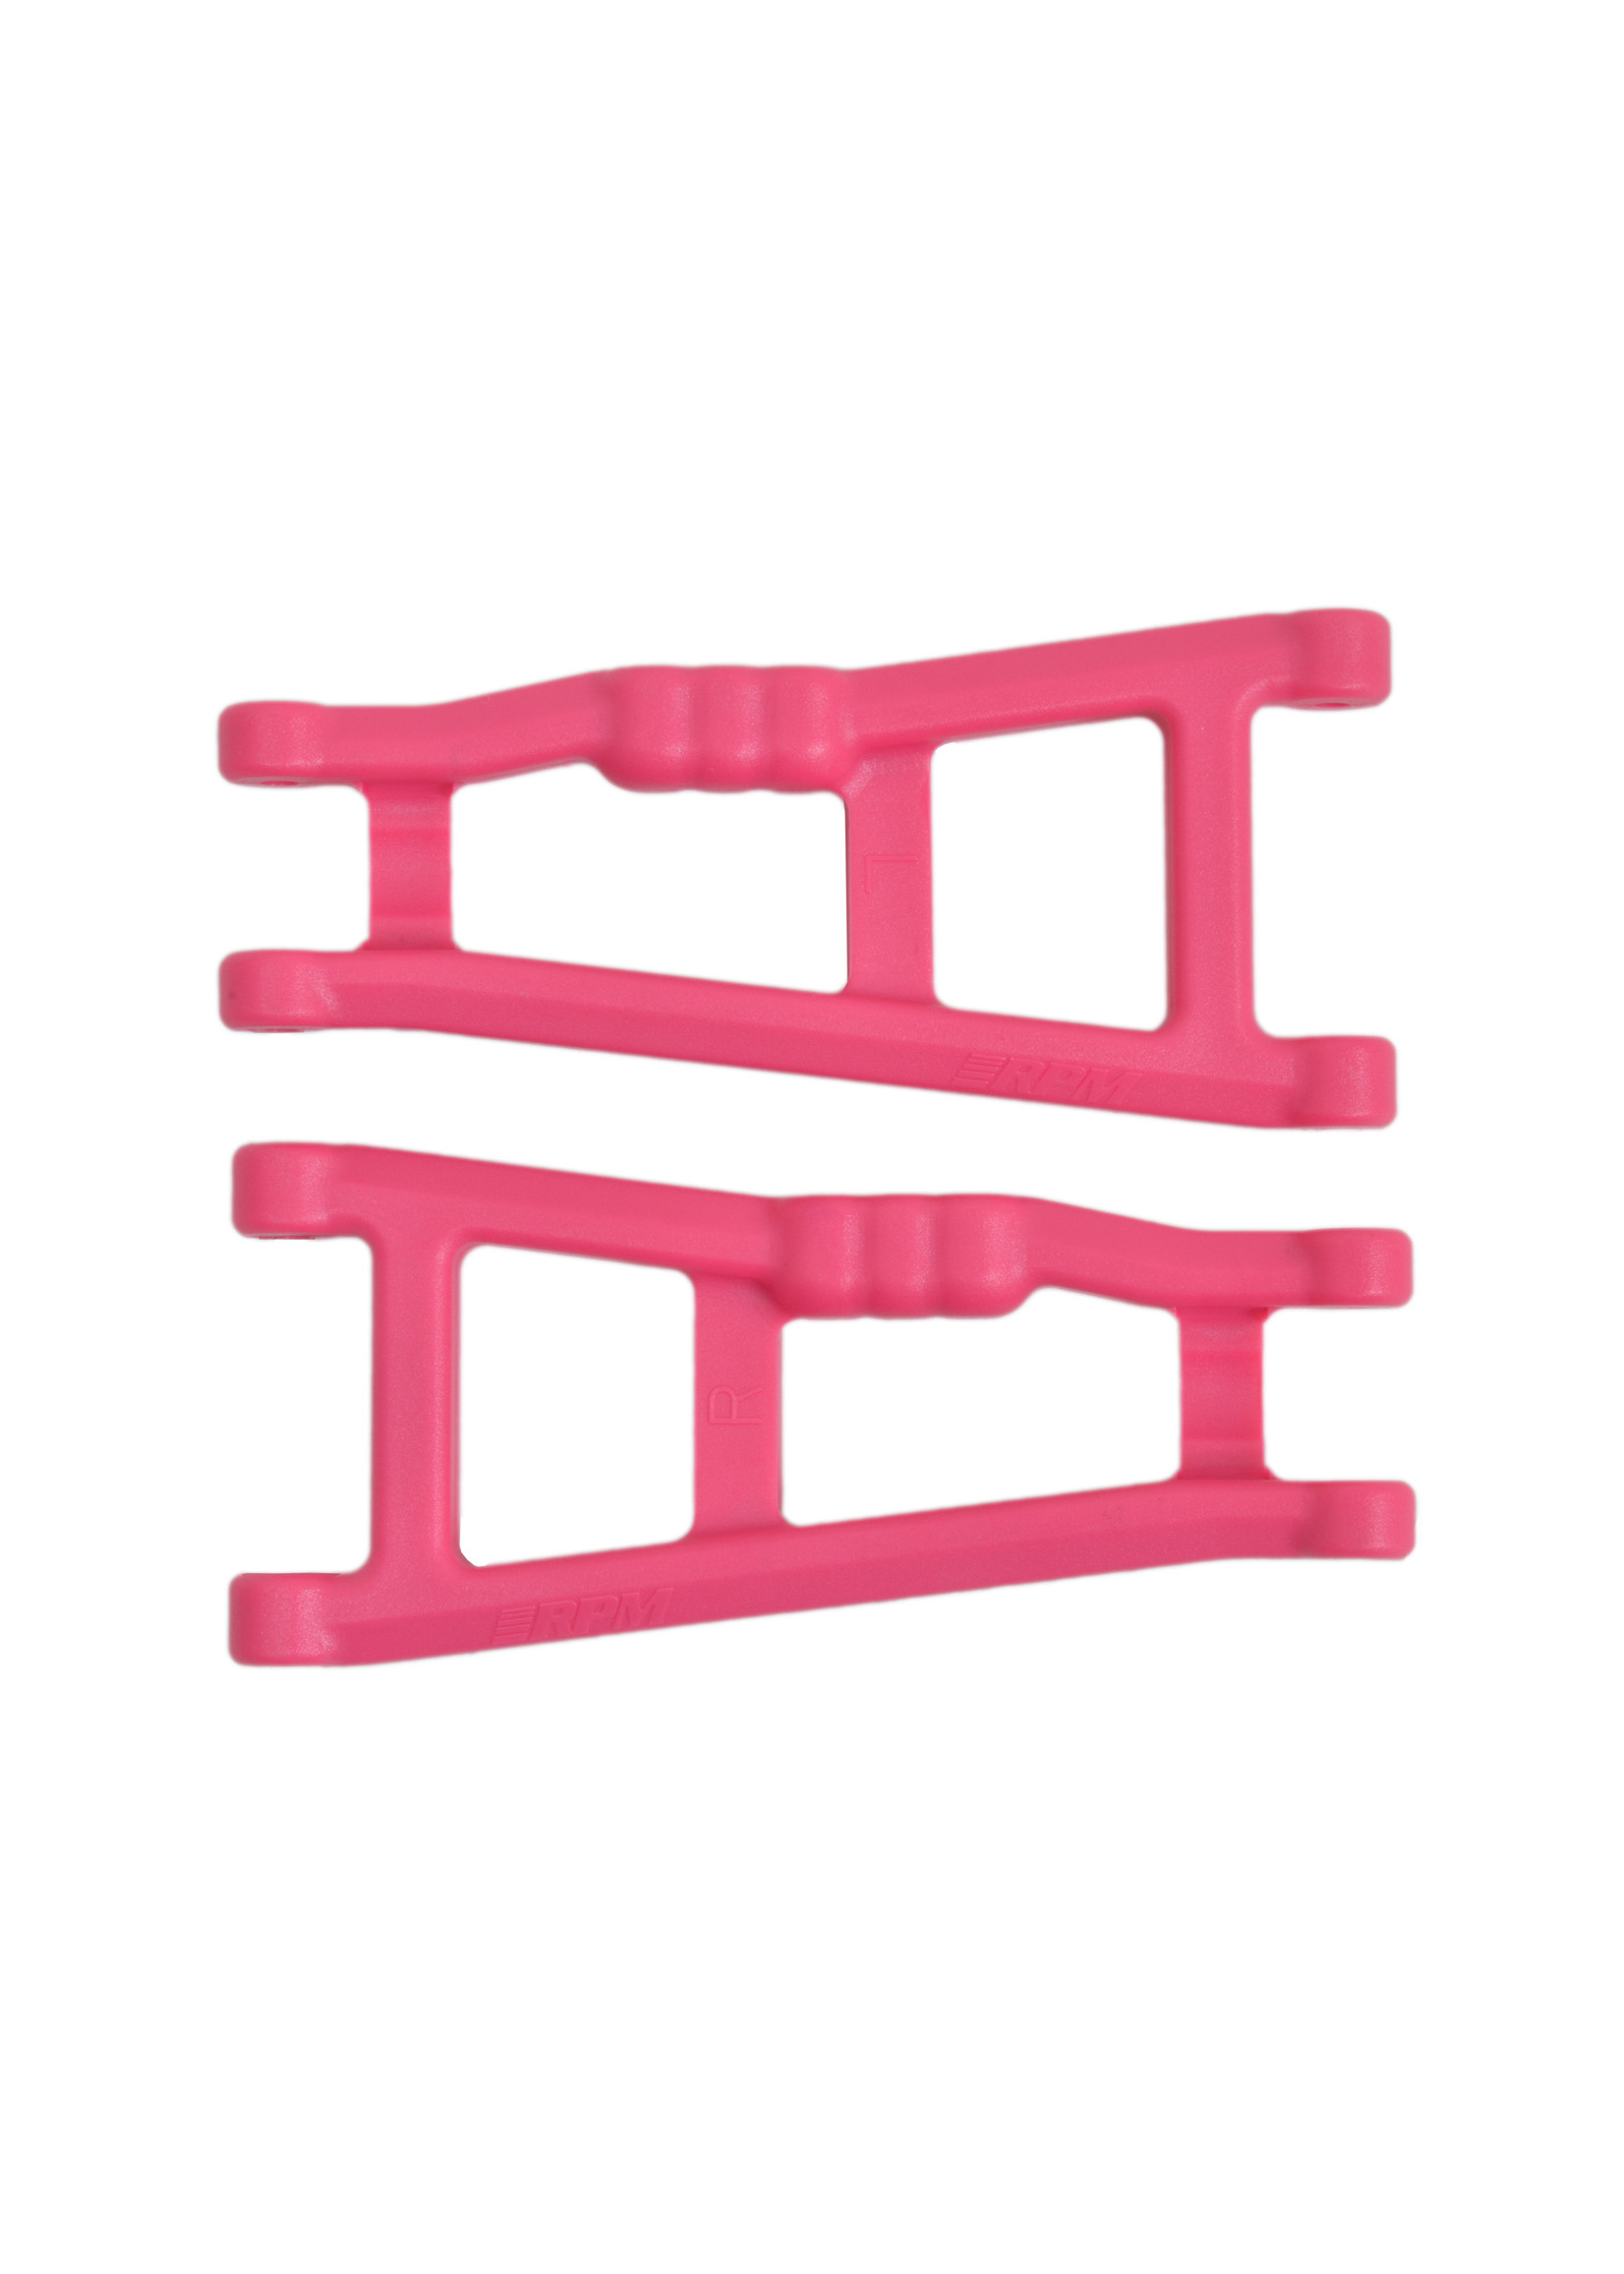 RPM 80187 - Rear A-arms for Rustler, Stampede - Pink